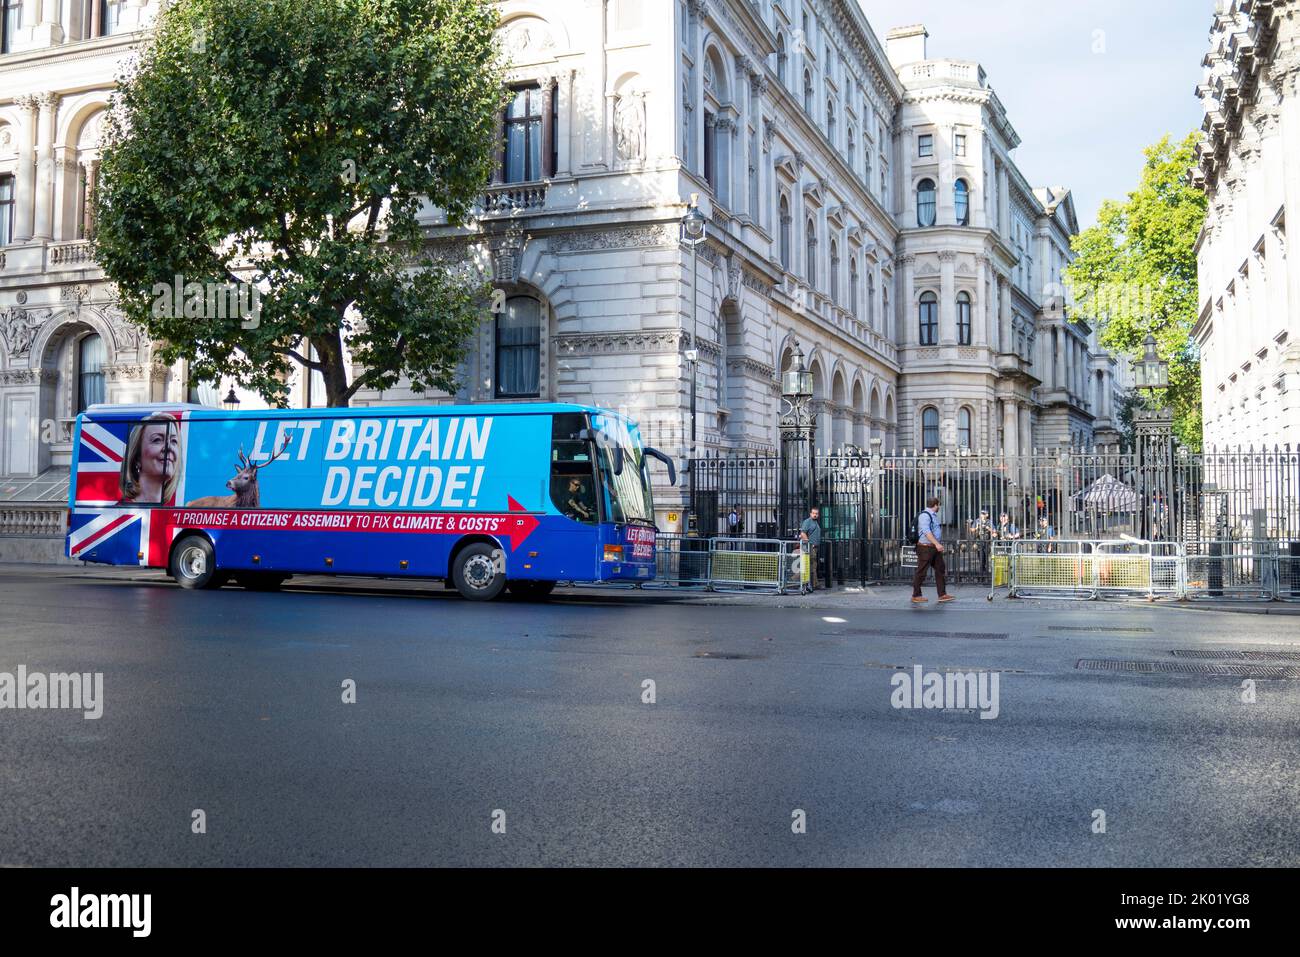 A hoax bus from Extinction Rebellion with the appearance of a Liz Truss campaign bus, outside Downing Street. Let Britain Decide, Citizen's assembly Stock Photo